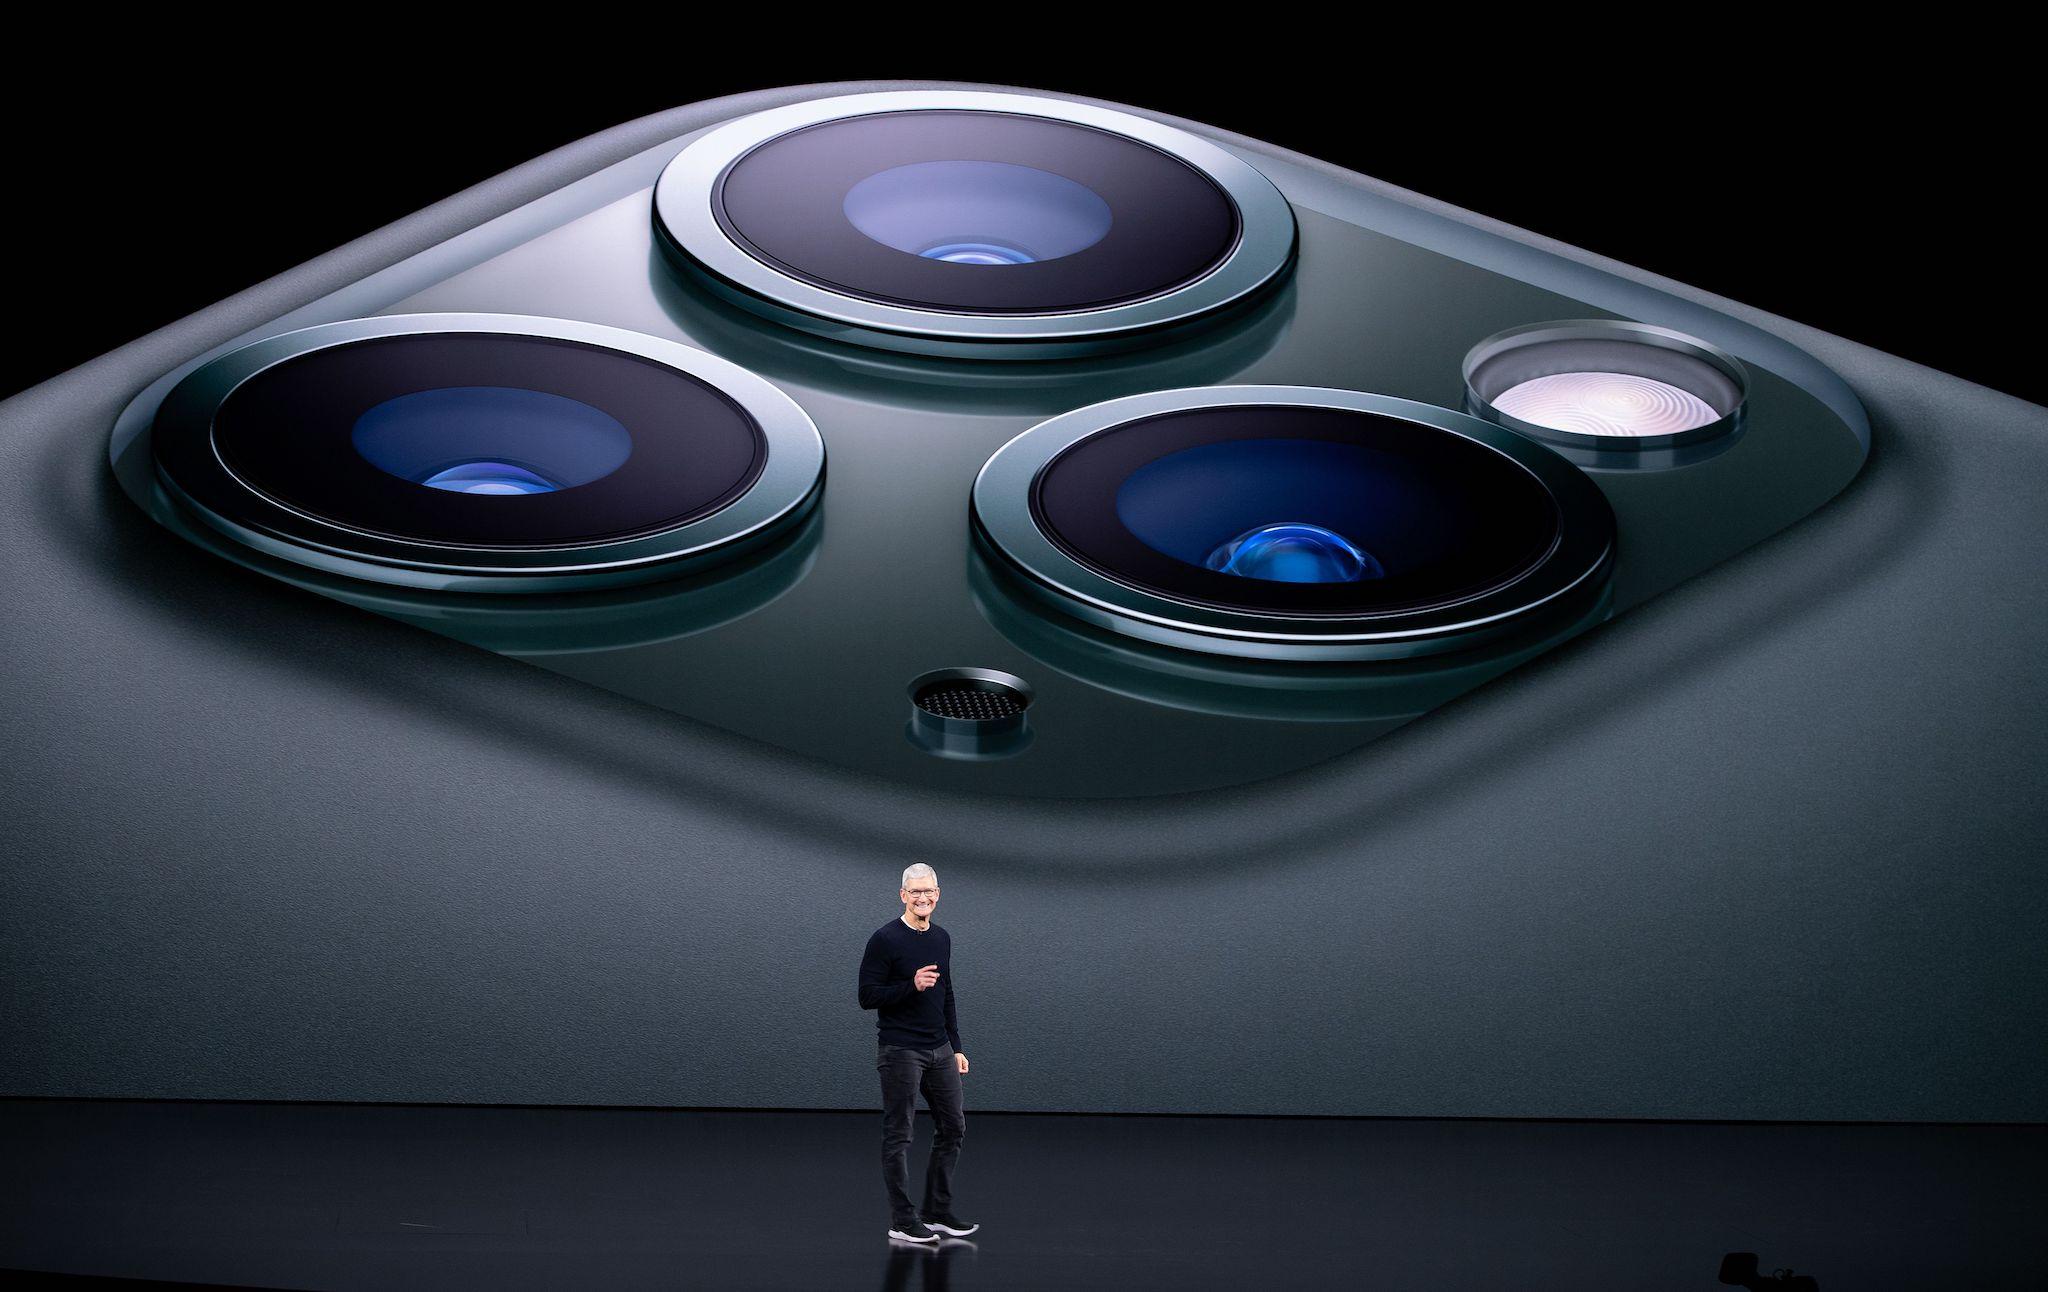 Apple CEO Tim Cook speaks on-stage during a product launch event at Apple's headquarters in Cupertino, California on September 10, 2019